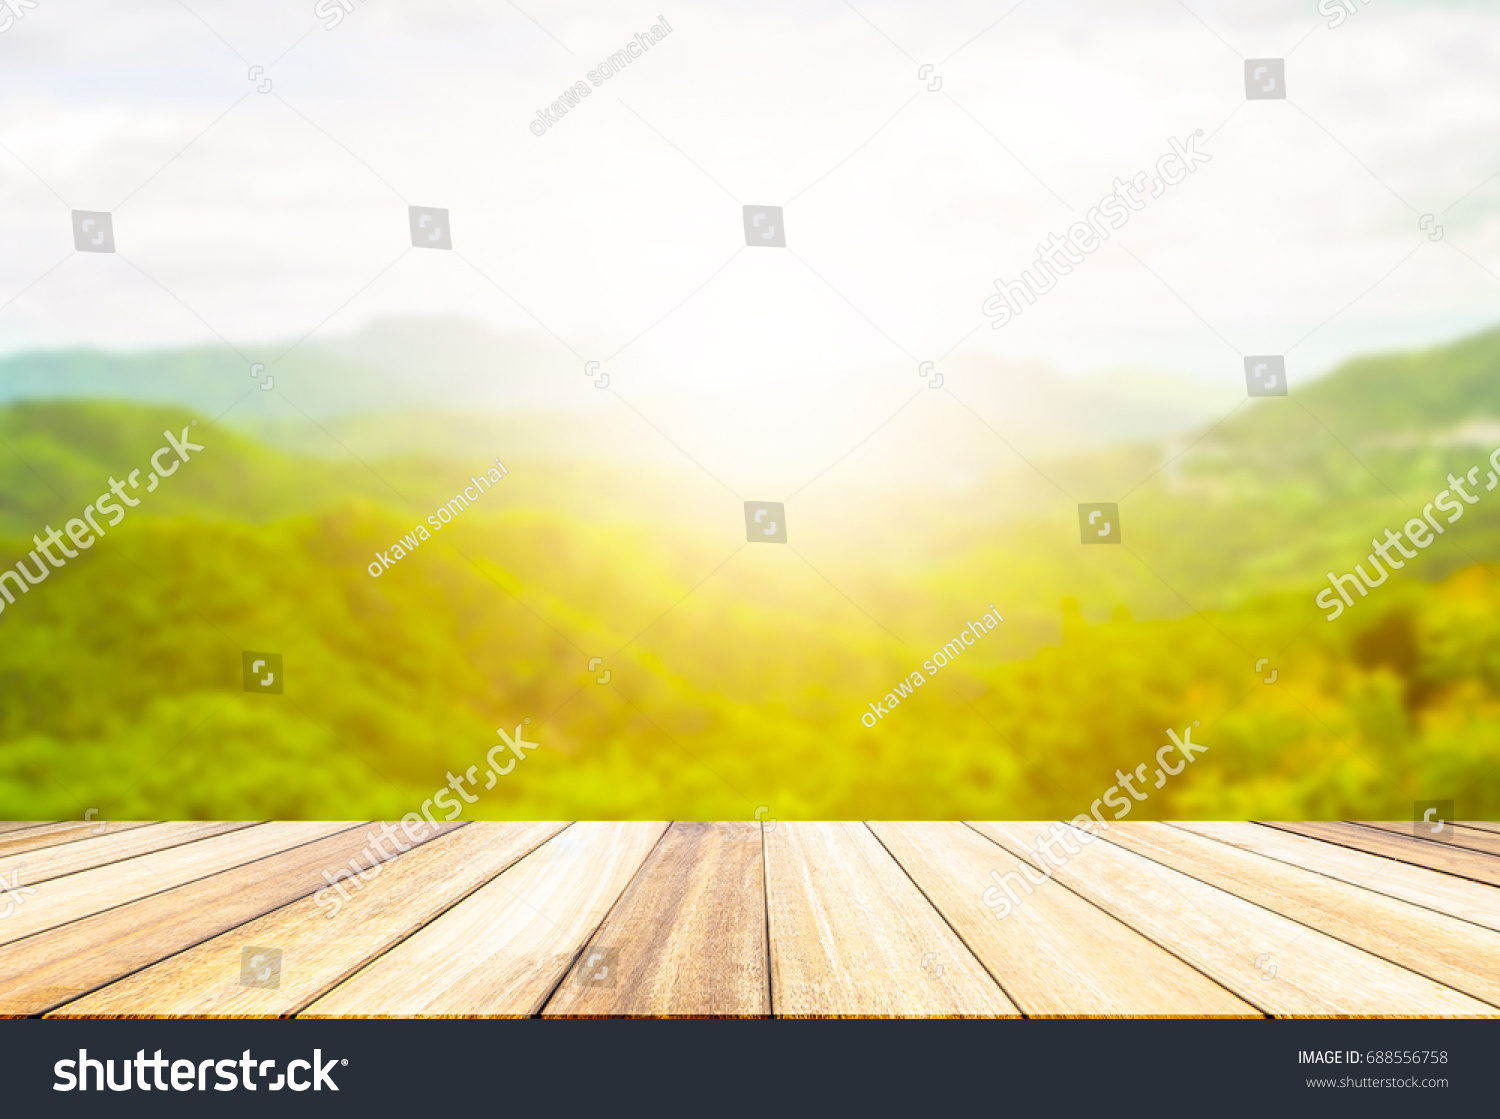 Perspective wood deck overlook the mountains  background atmosphere as the sun sets. Services include product display  template #688556758